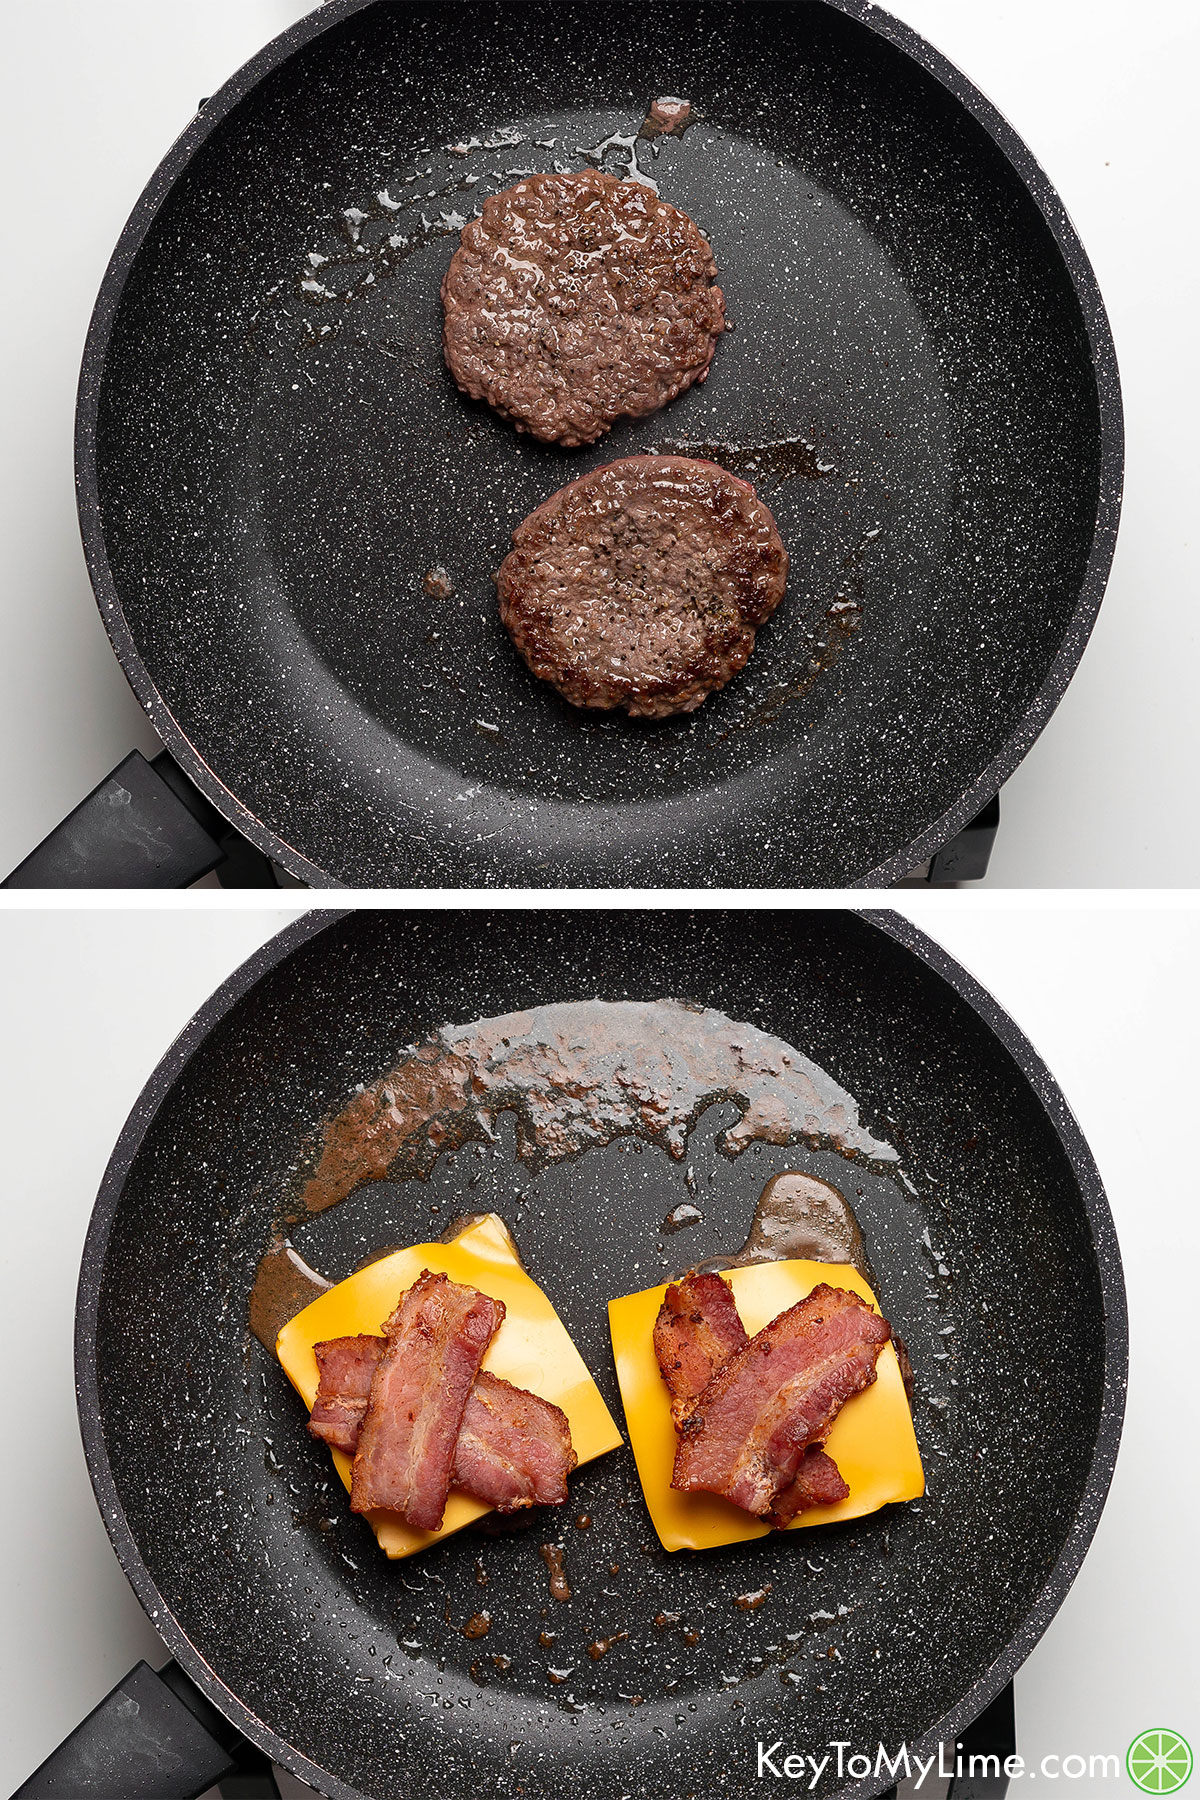 Cooking hamburgers in a skillet, then adding American cheese and cooked bacon slices.